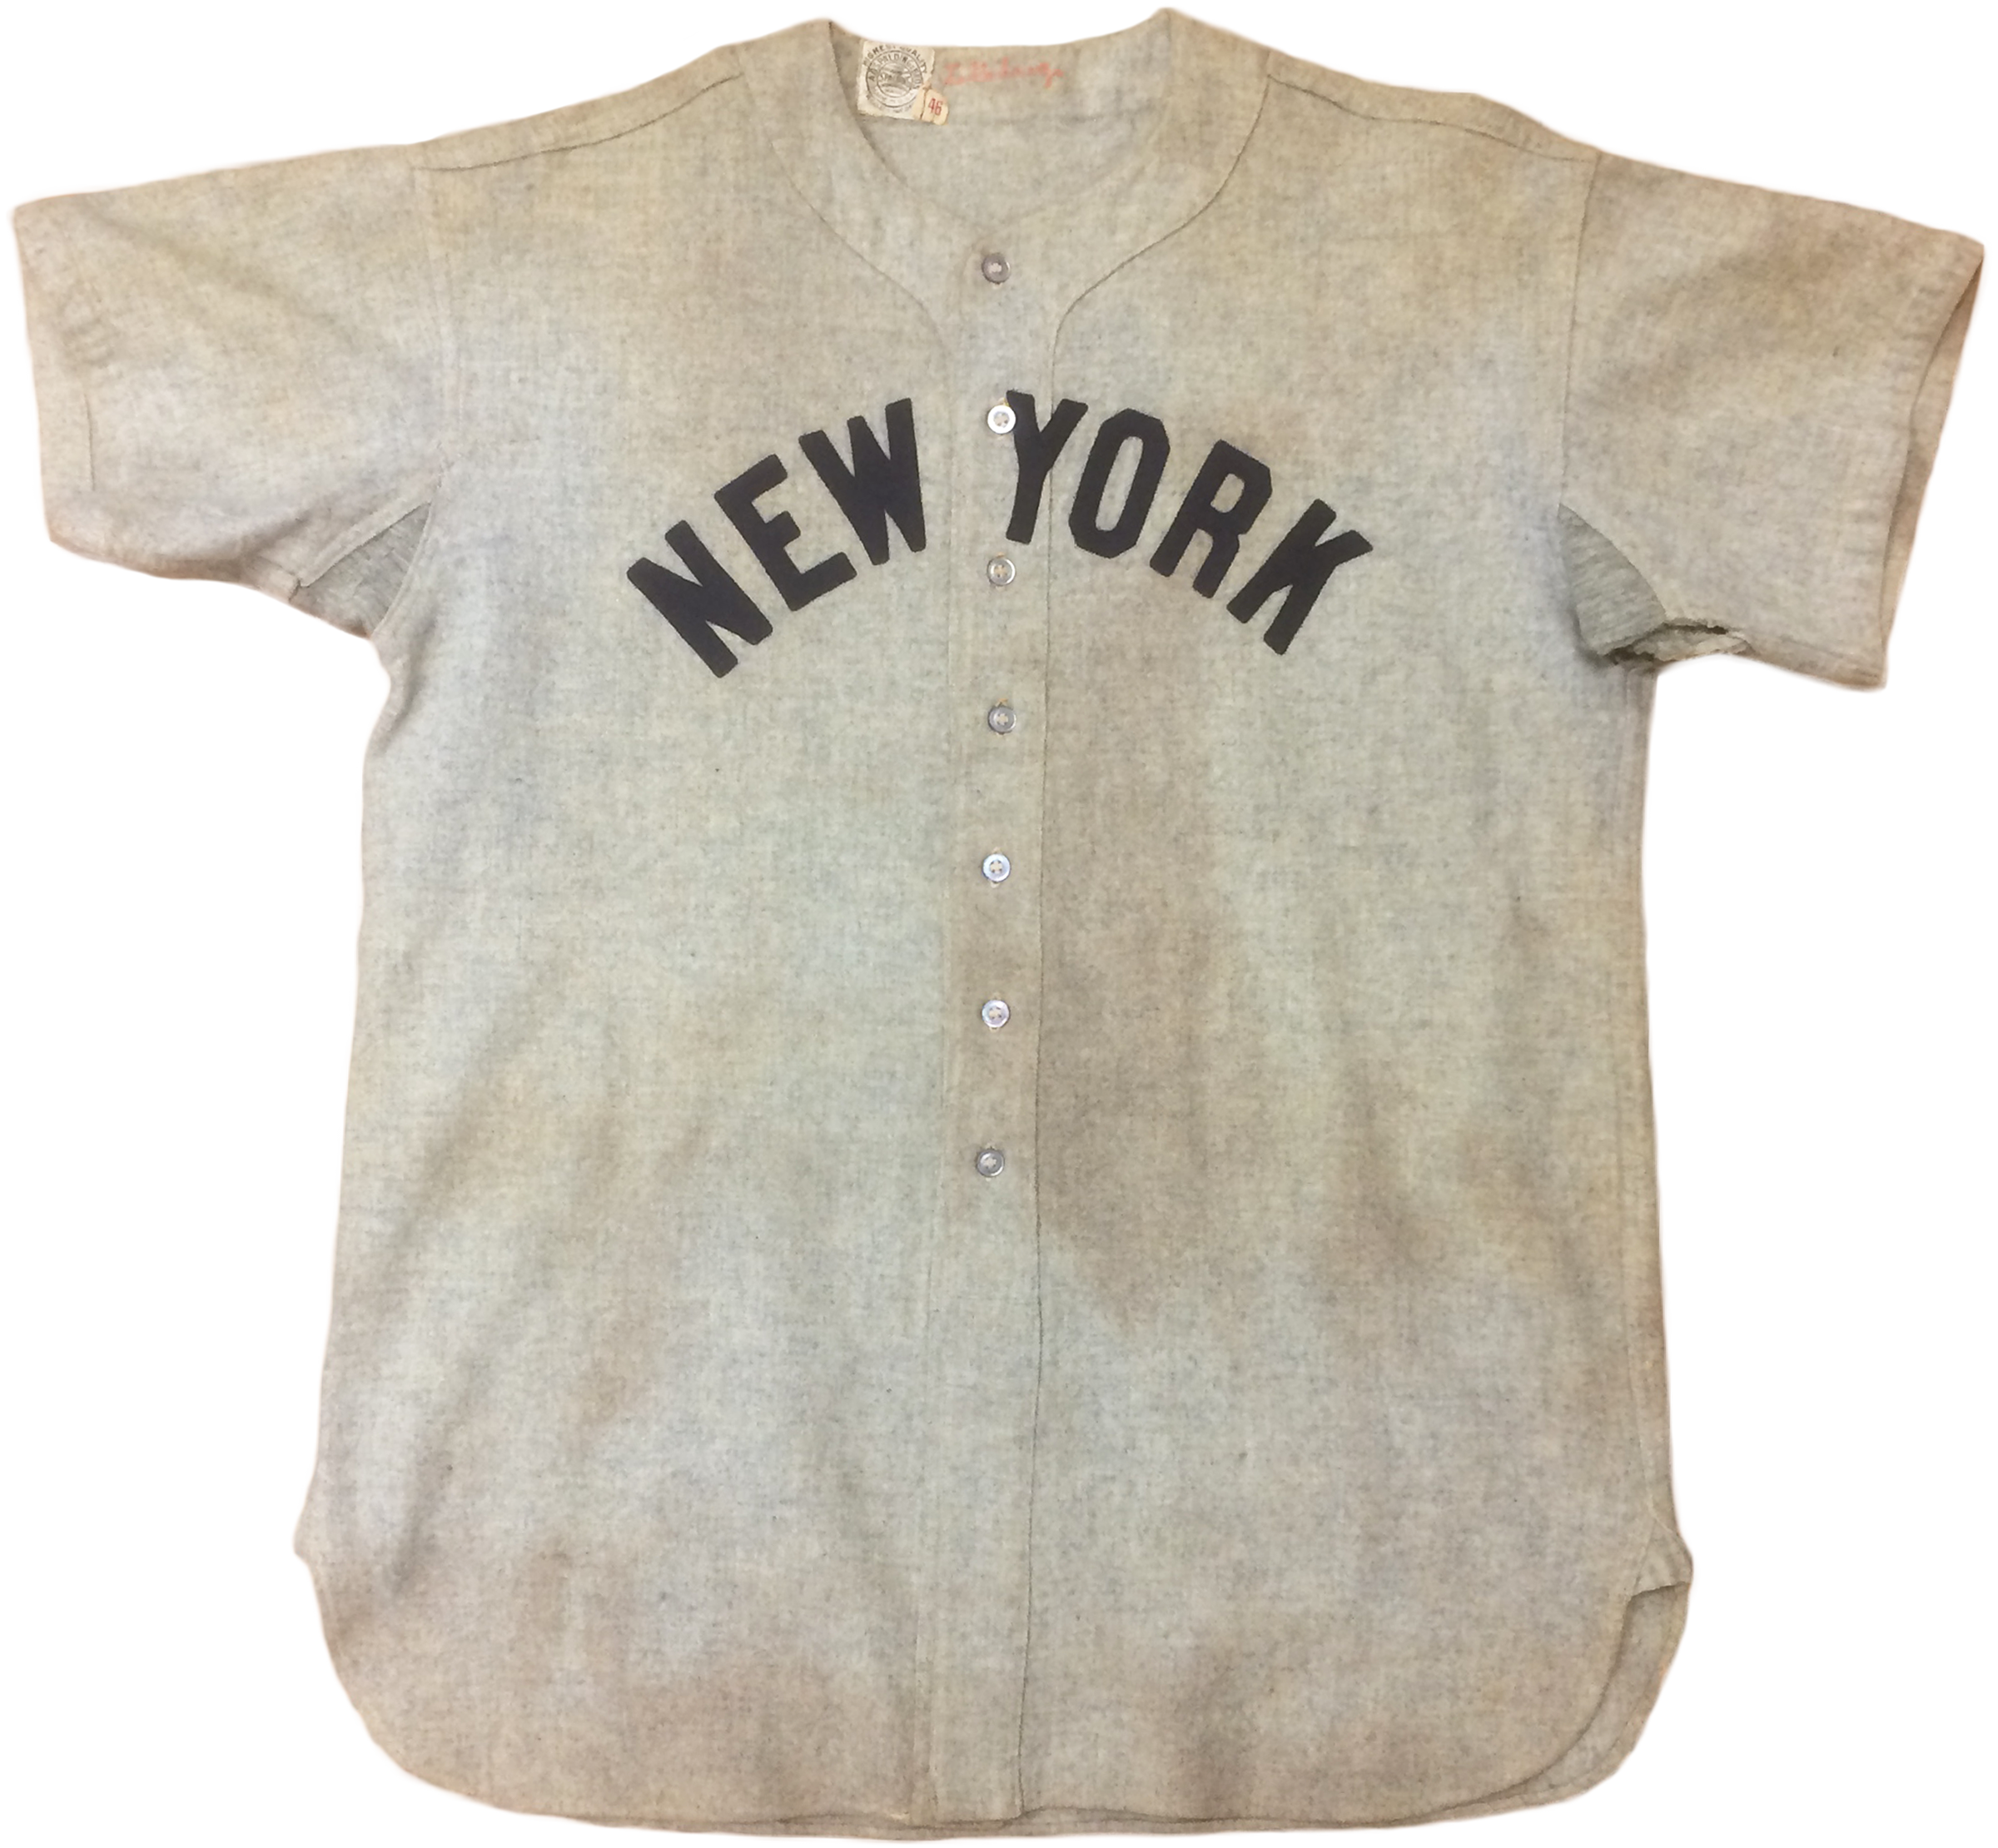 ty cobb jersey for sale